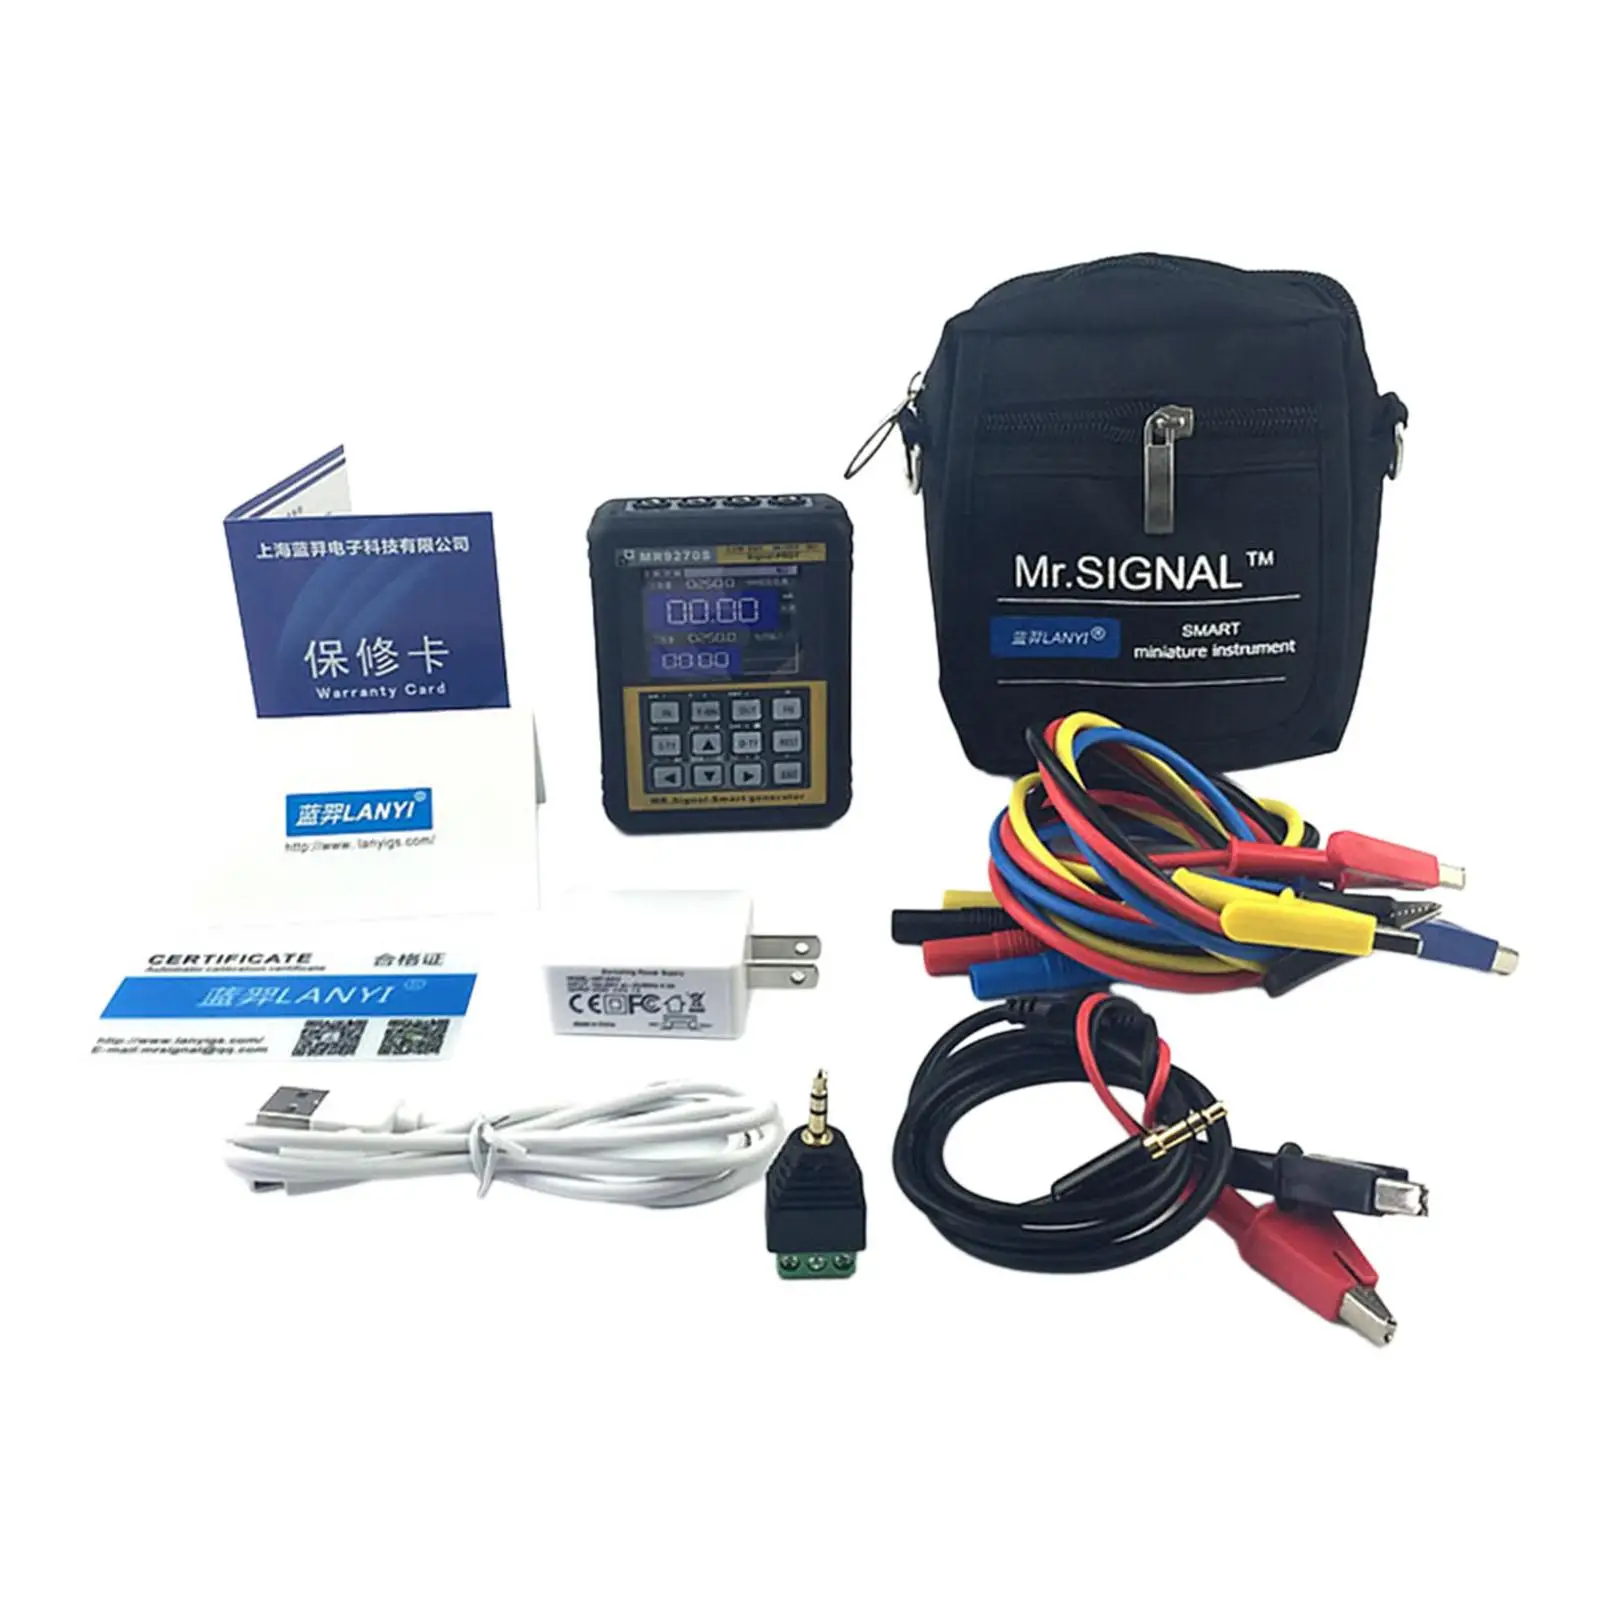 4-20MA Signal Generator 2.4inch LCD Display Electrical Testing Tools Calibration Current Voltage Thermocouple Paperless Logger